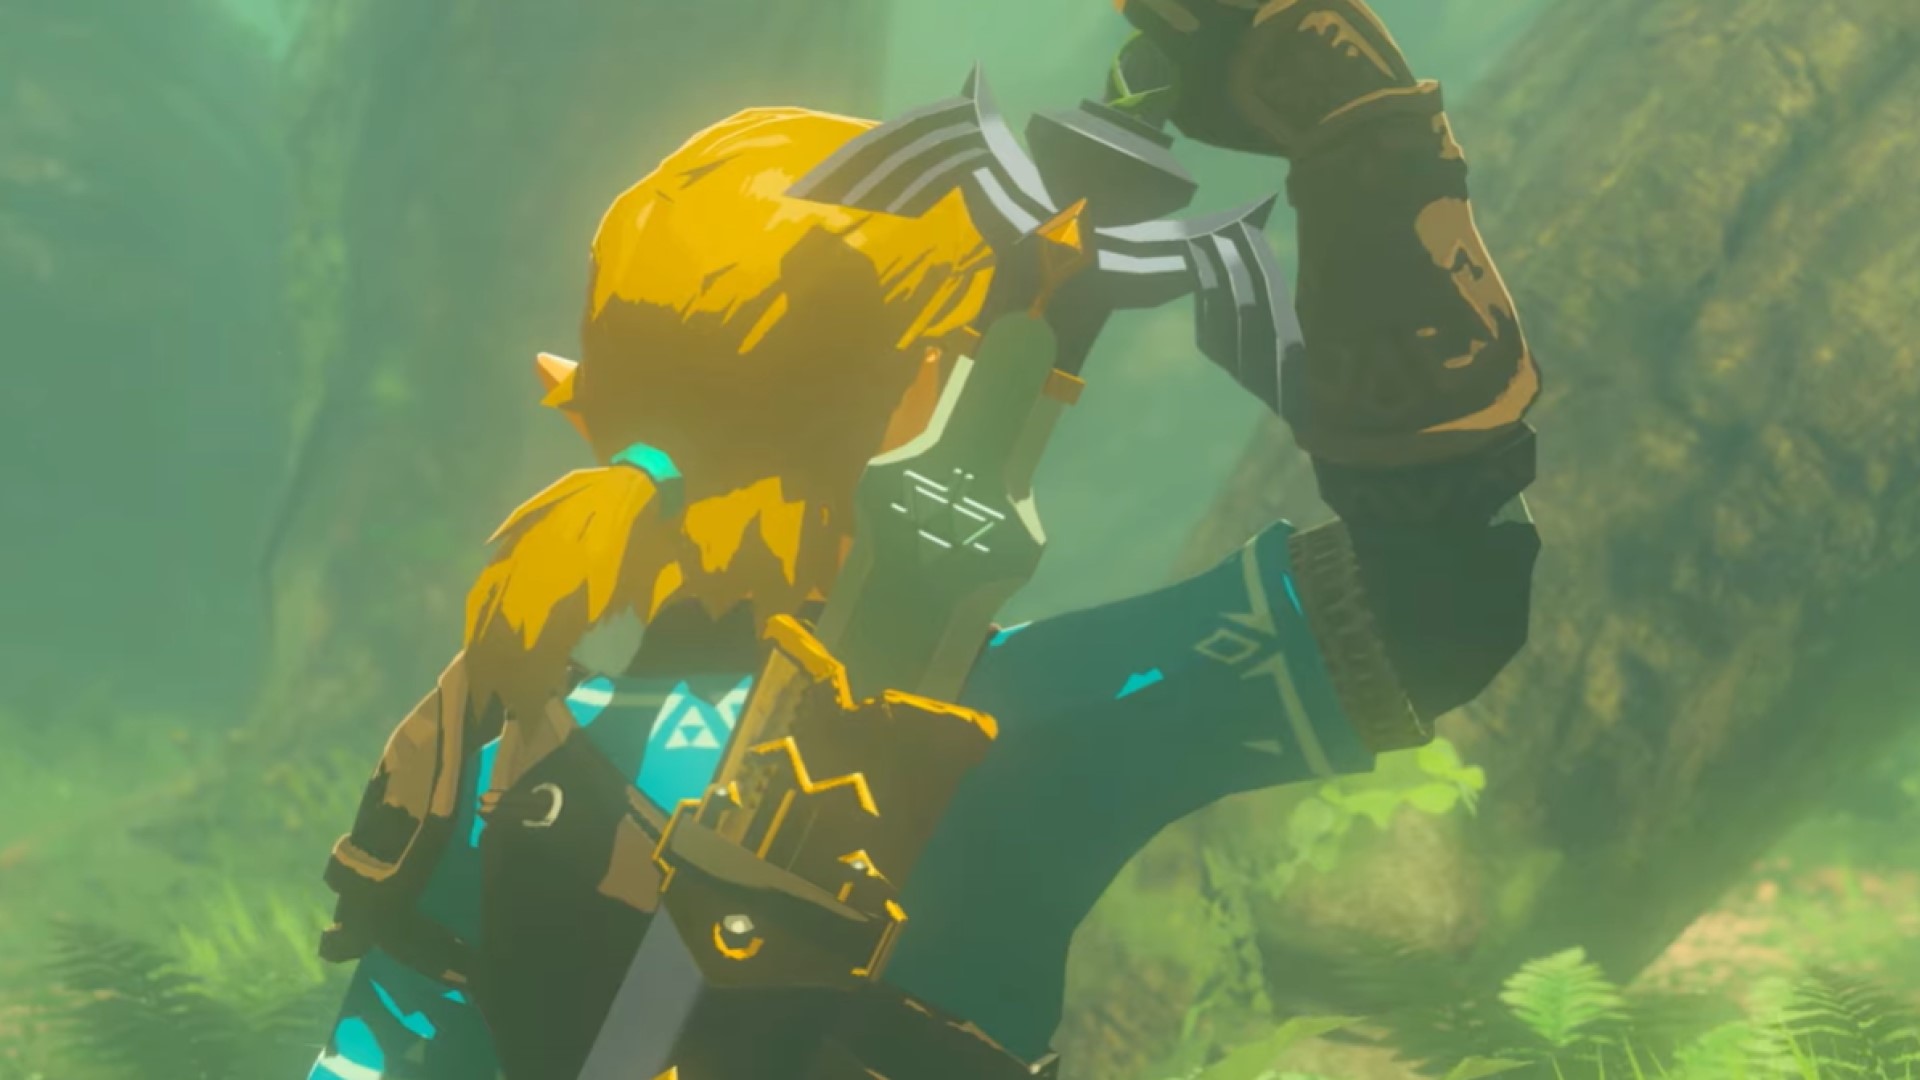 The Legend of Zelda Movie Will “Deliver an Amazing Tale of Adventure and Discovery” – Sony CEO